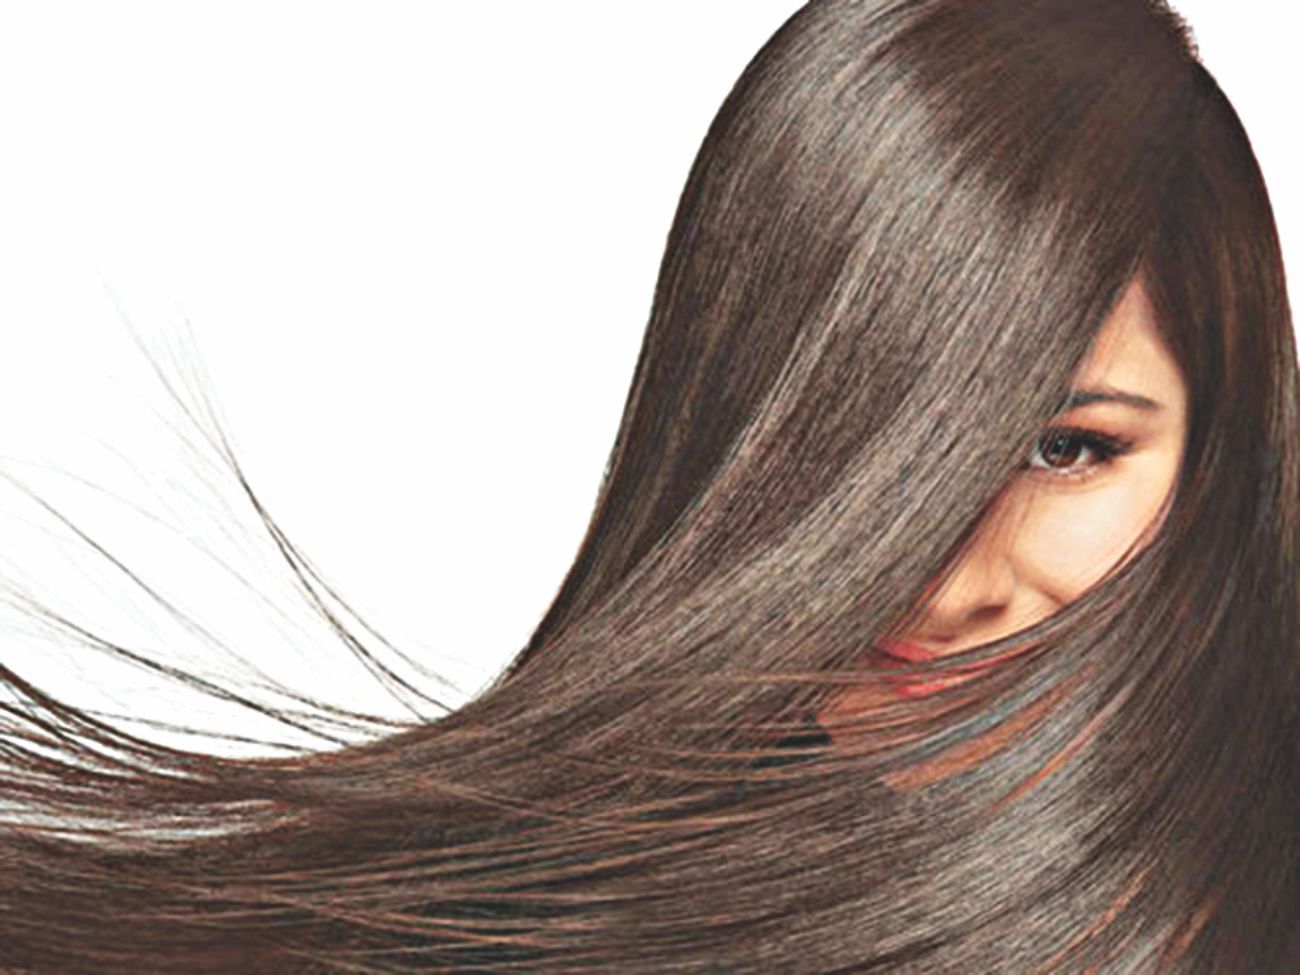 How to make your hair healthy, black and shiny | The Daily Star